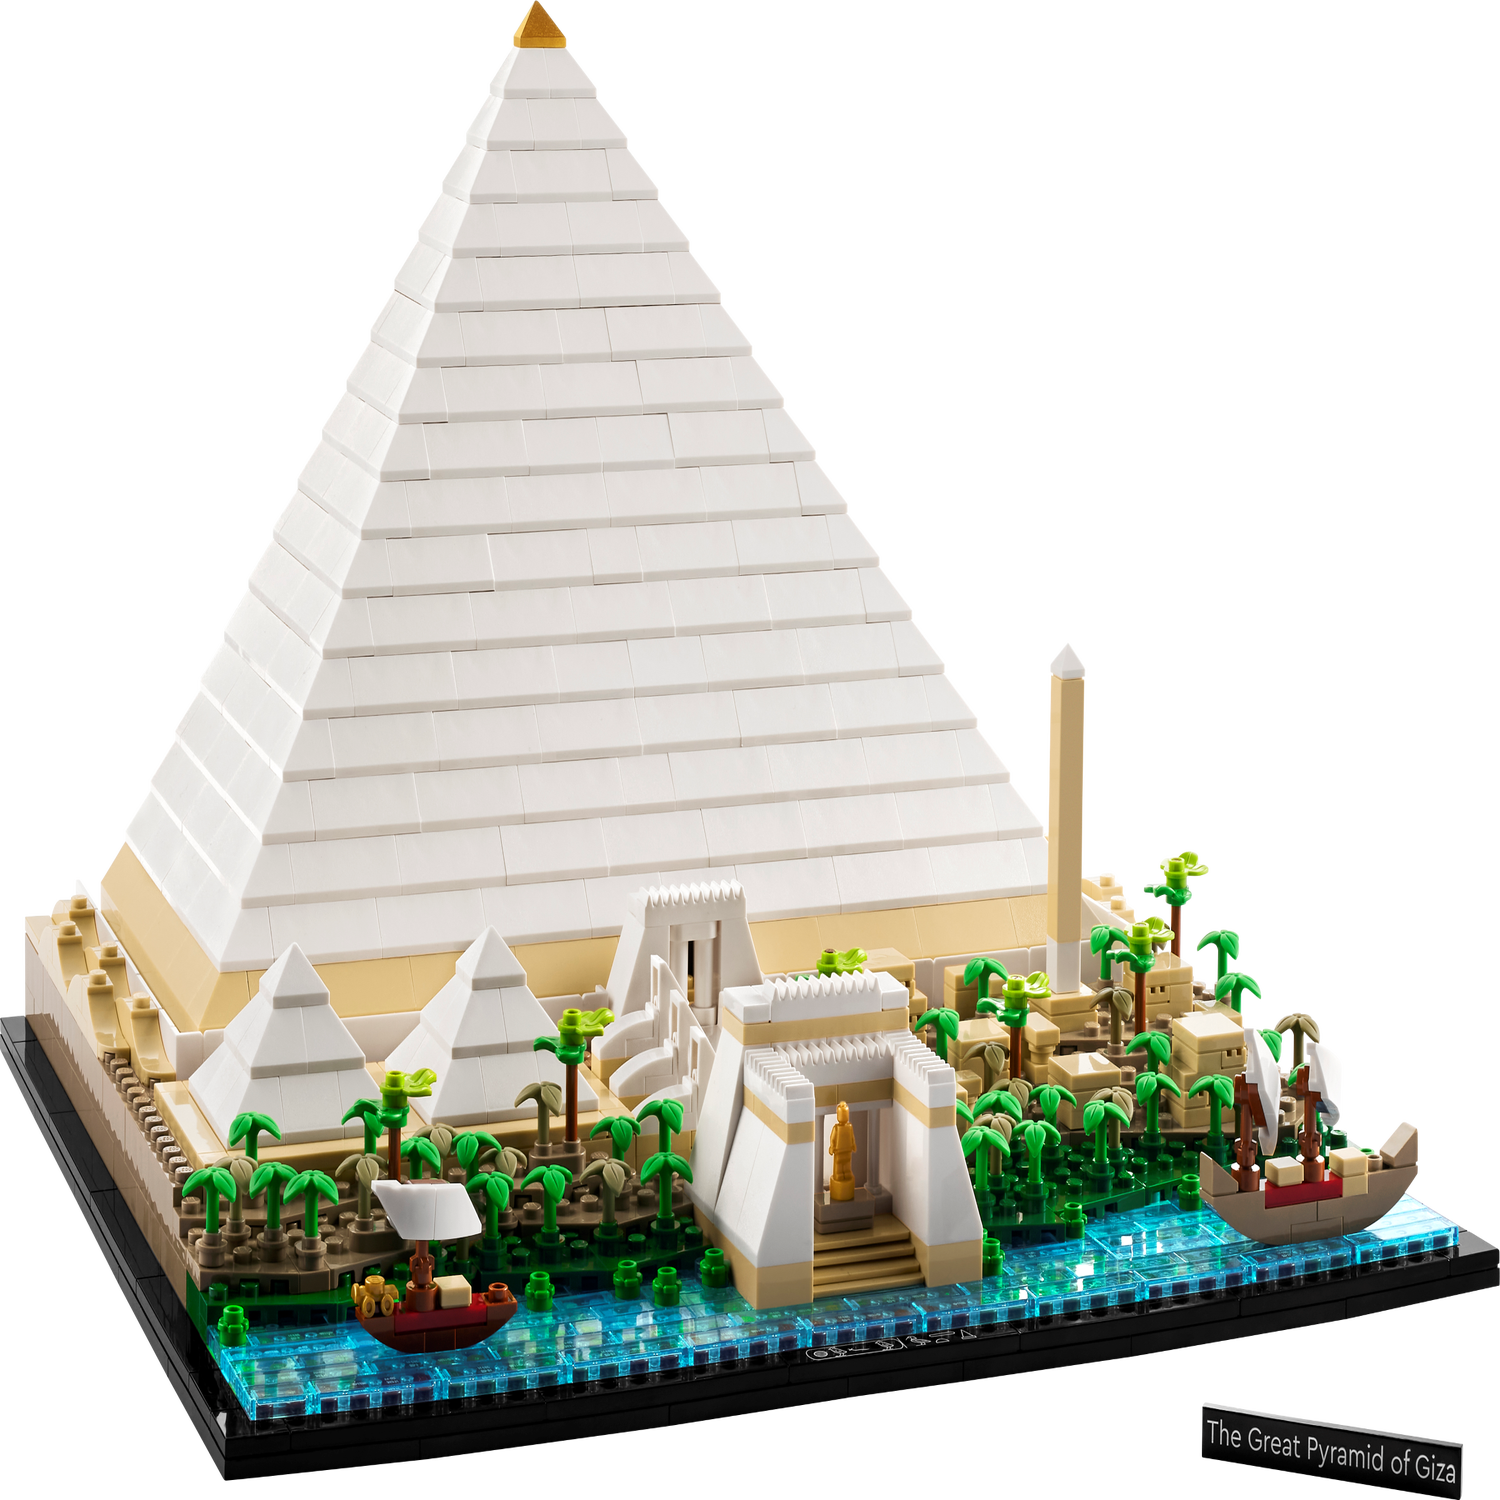 Great Pyramid Architecture of | Giza online Buy US LEGO® | at Official 21058 Shop the